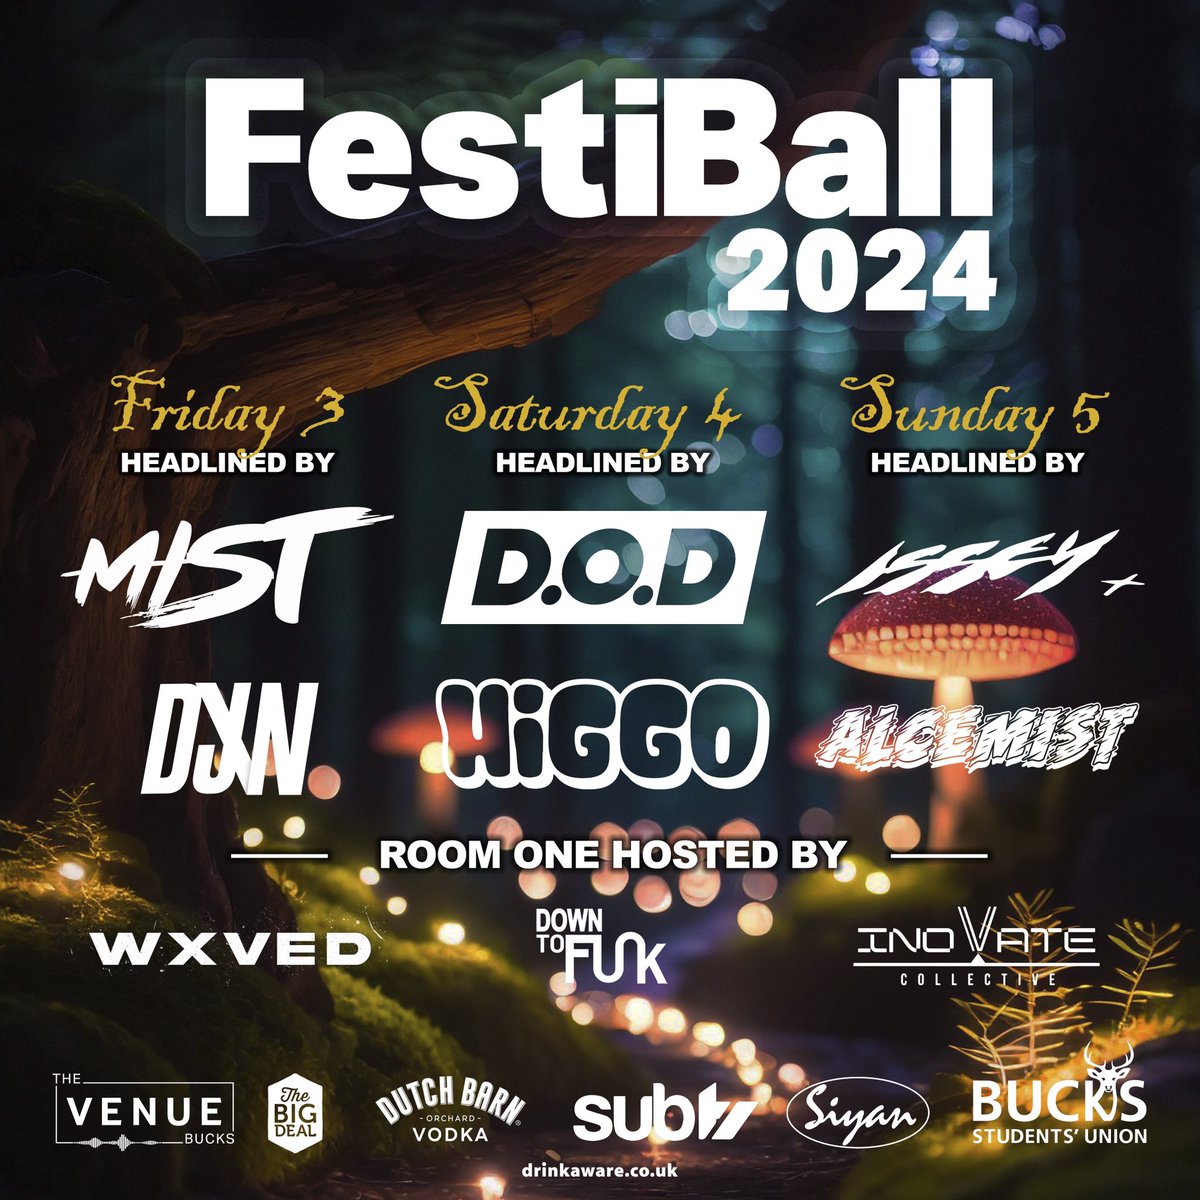 ITS HERE…OUR FESTIBALL 2024 FULL LINE UP 🤩🤩🤩 We are so excited to finally share this with you!! This is the perfect time to get your Alumni and Public tickets 🎟️ (the link is in our bio😉!!) Keep your eyes peeled for more exciting Festiball information coming soon! 👀